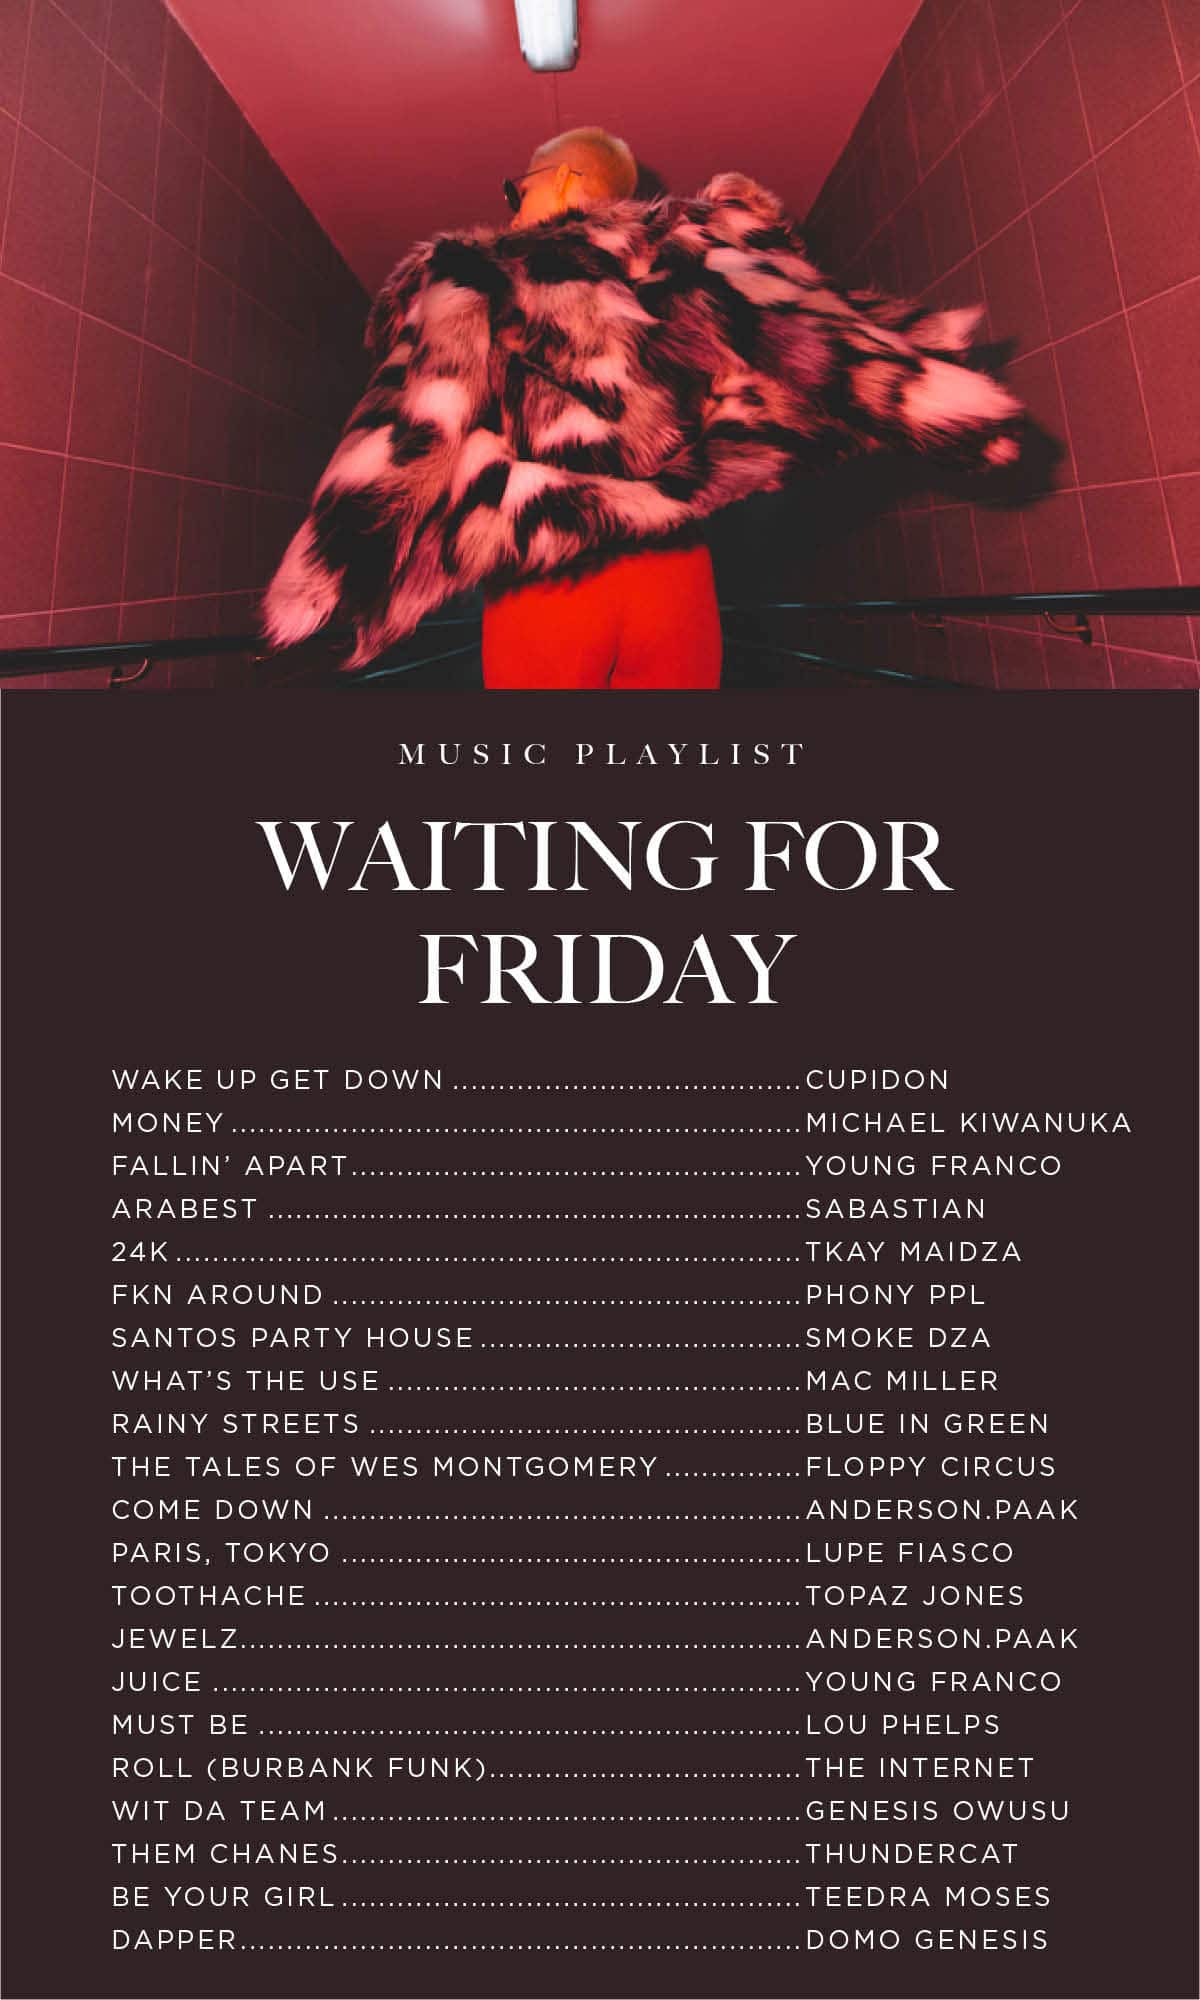 New Music Playlist - Waiting For Friday